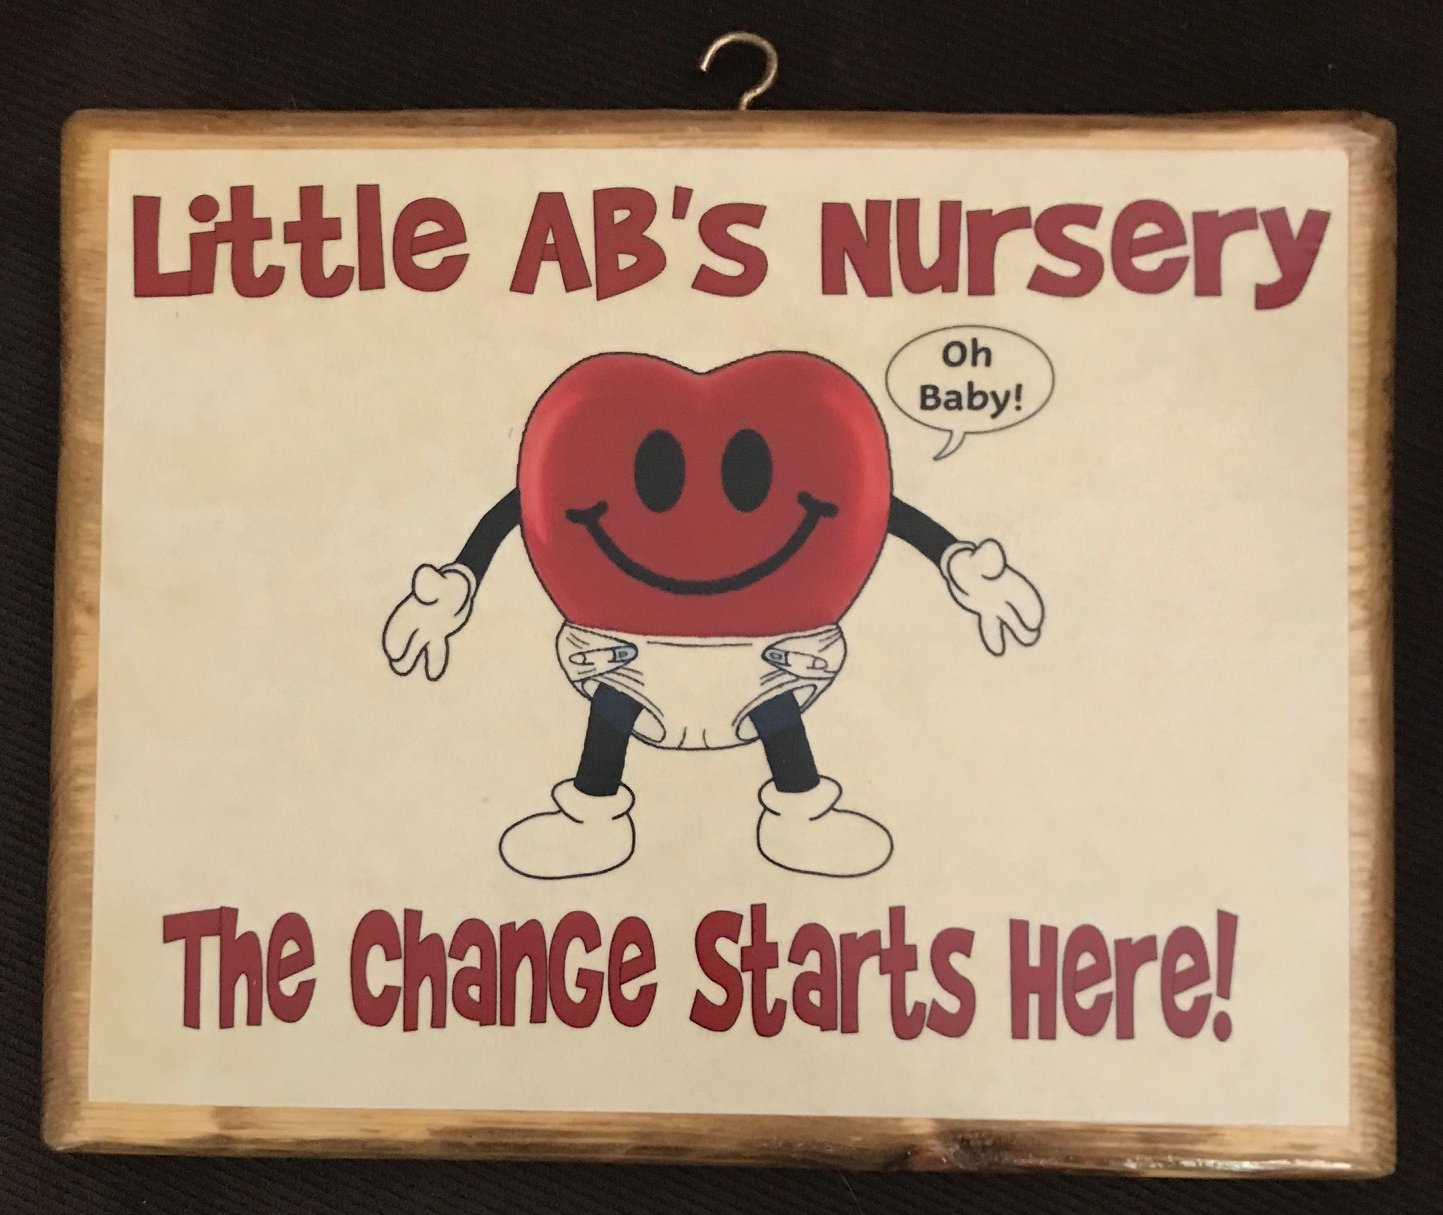 Little AB's Nursery - The Change Starts Here